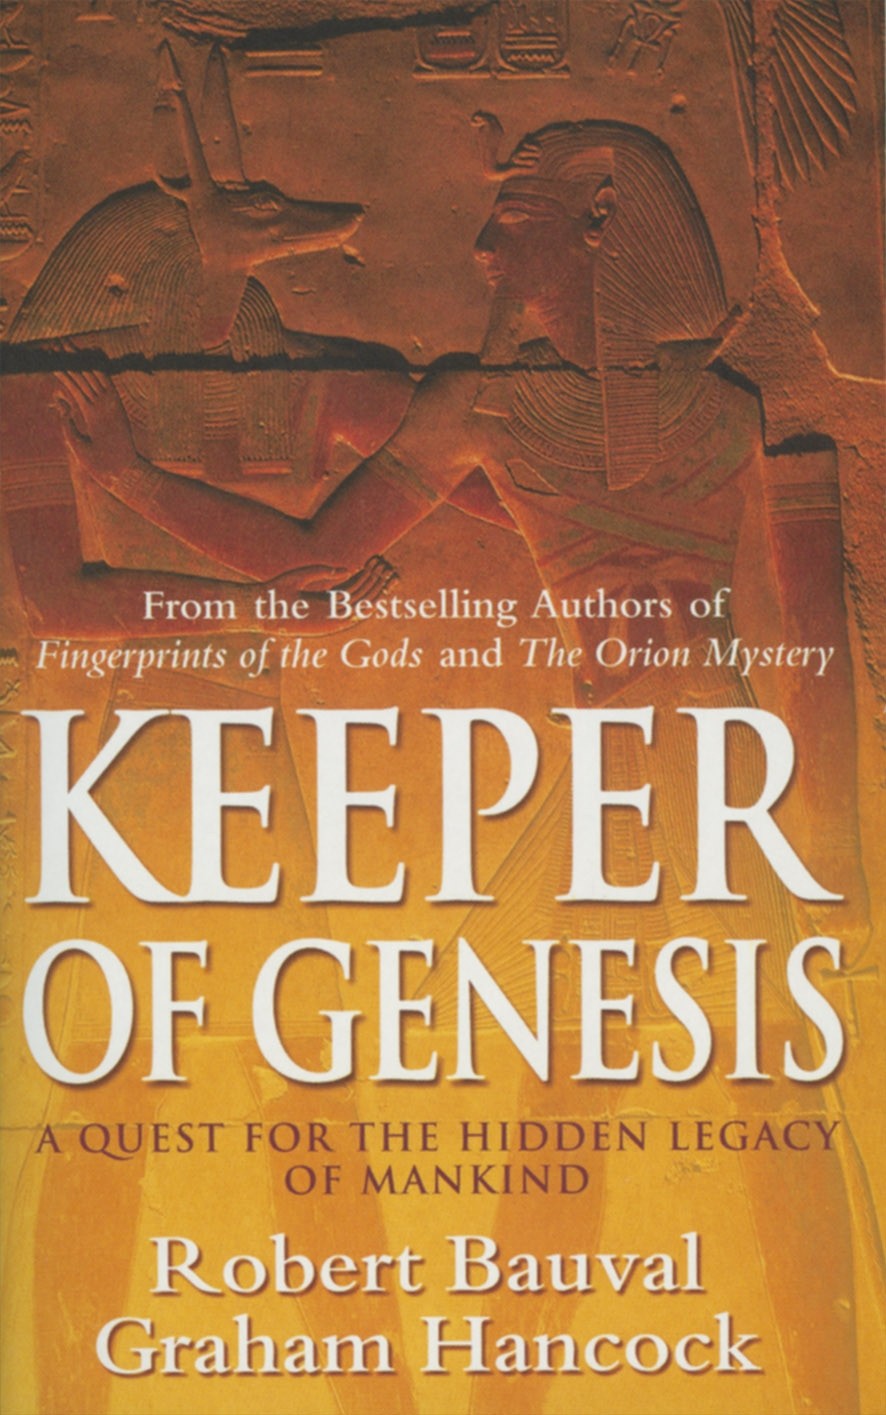 Keeper of Genesis: A Quest for the Hidden Legacy of Mankind